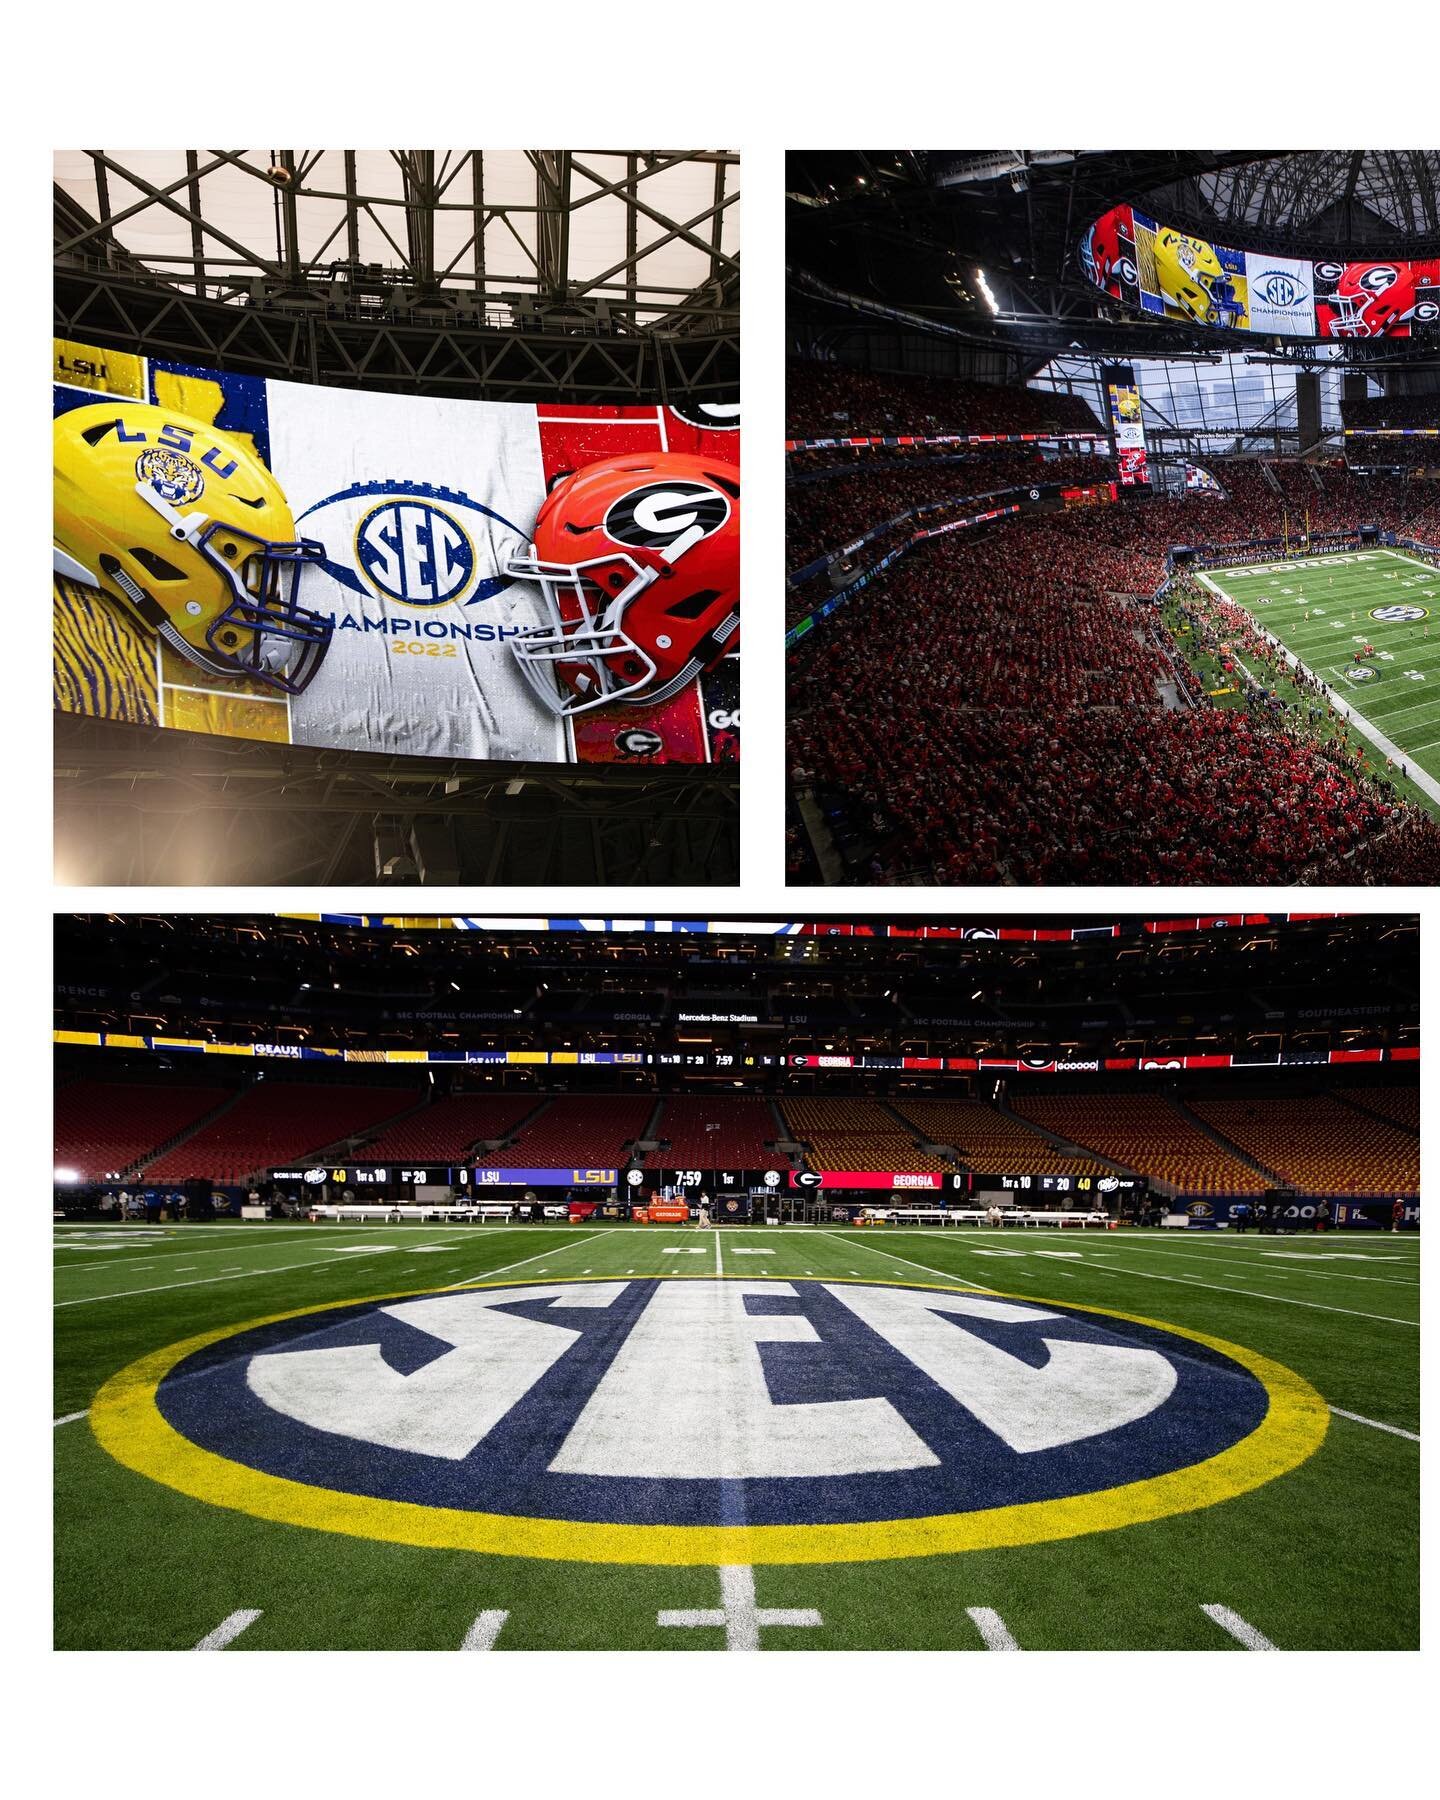 A few more form the UGA bulldogs victory over the LSU tigers at the SEC Championship game in Atlanta, GA
&bull;